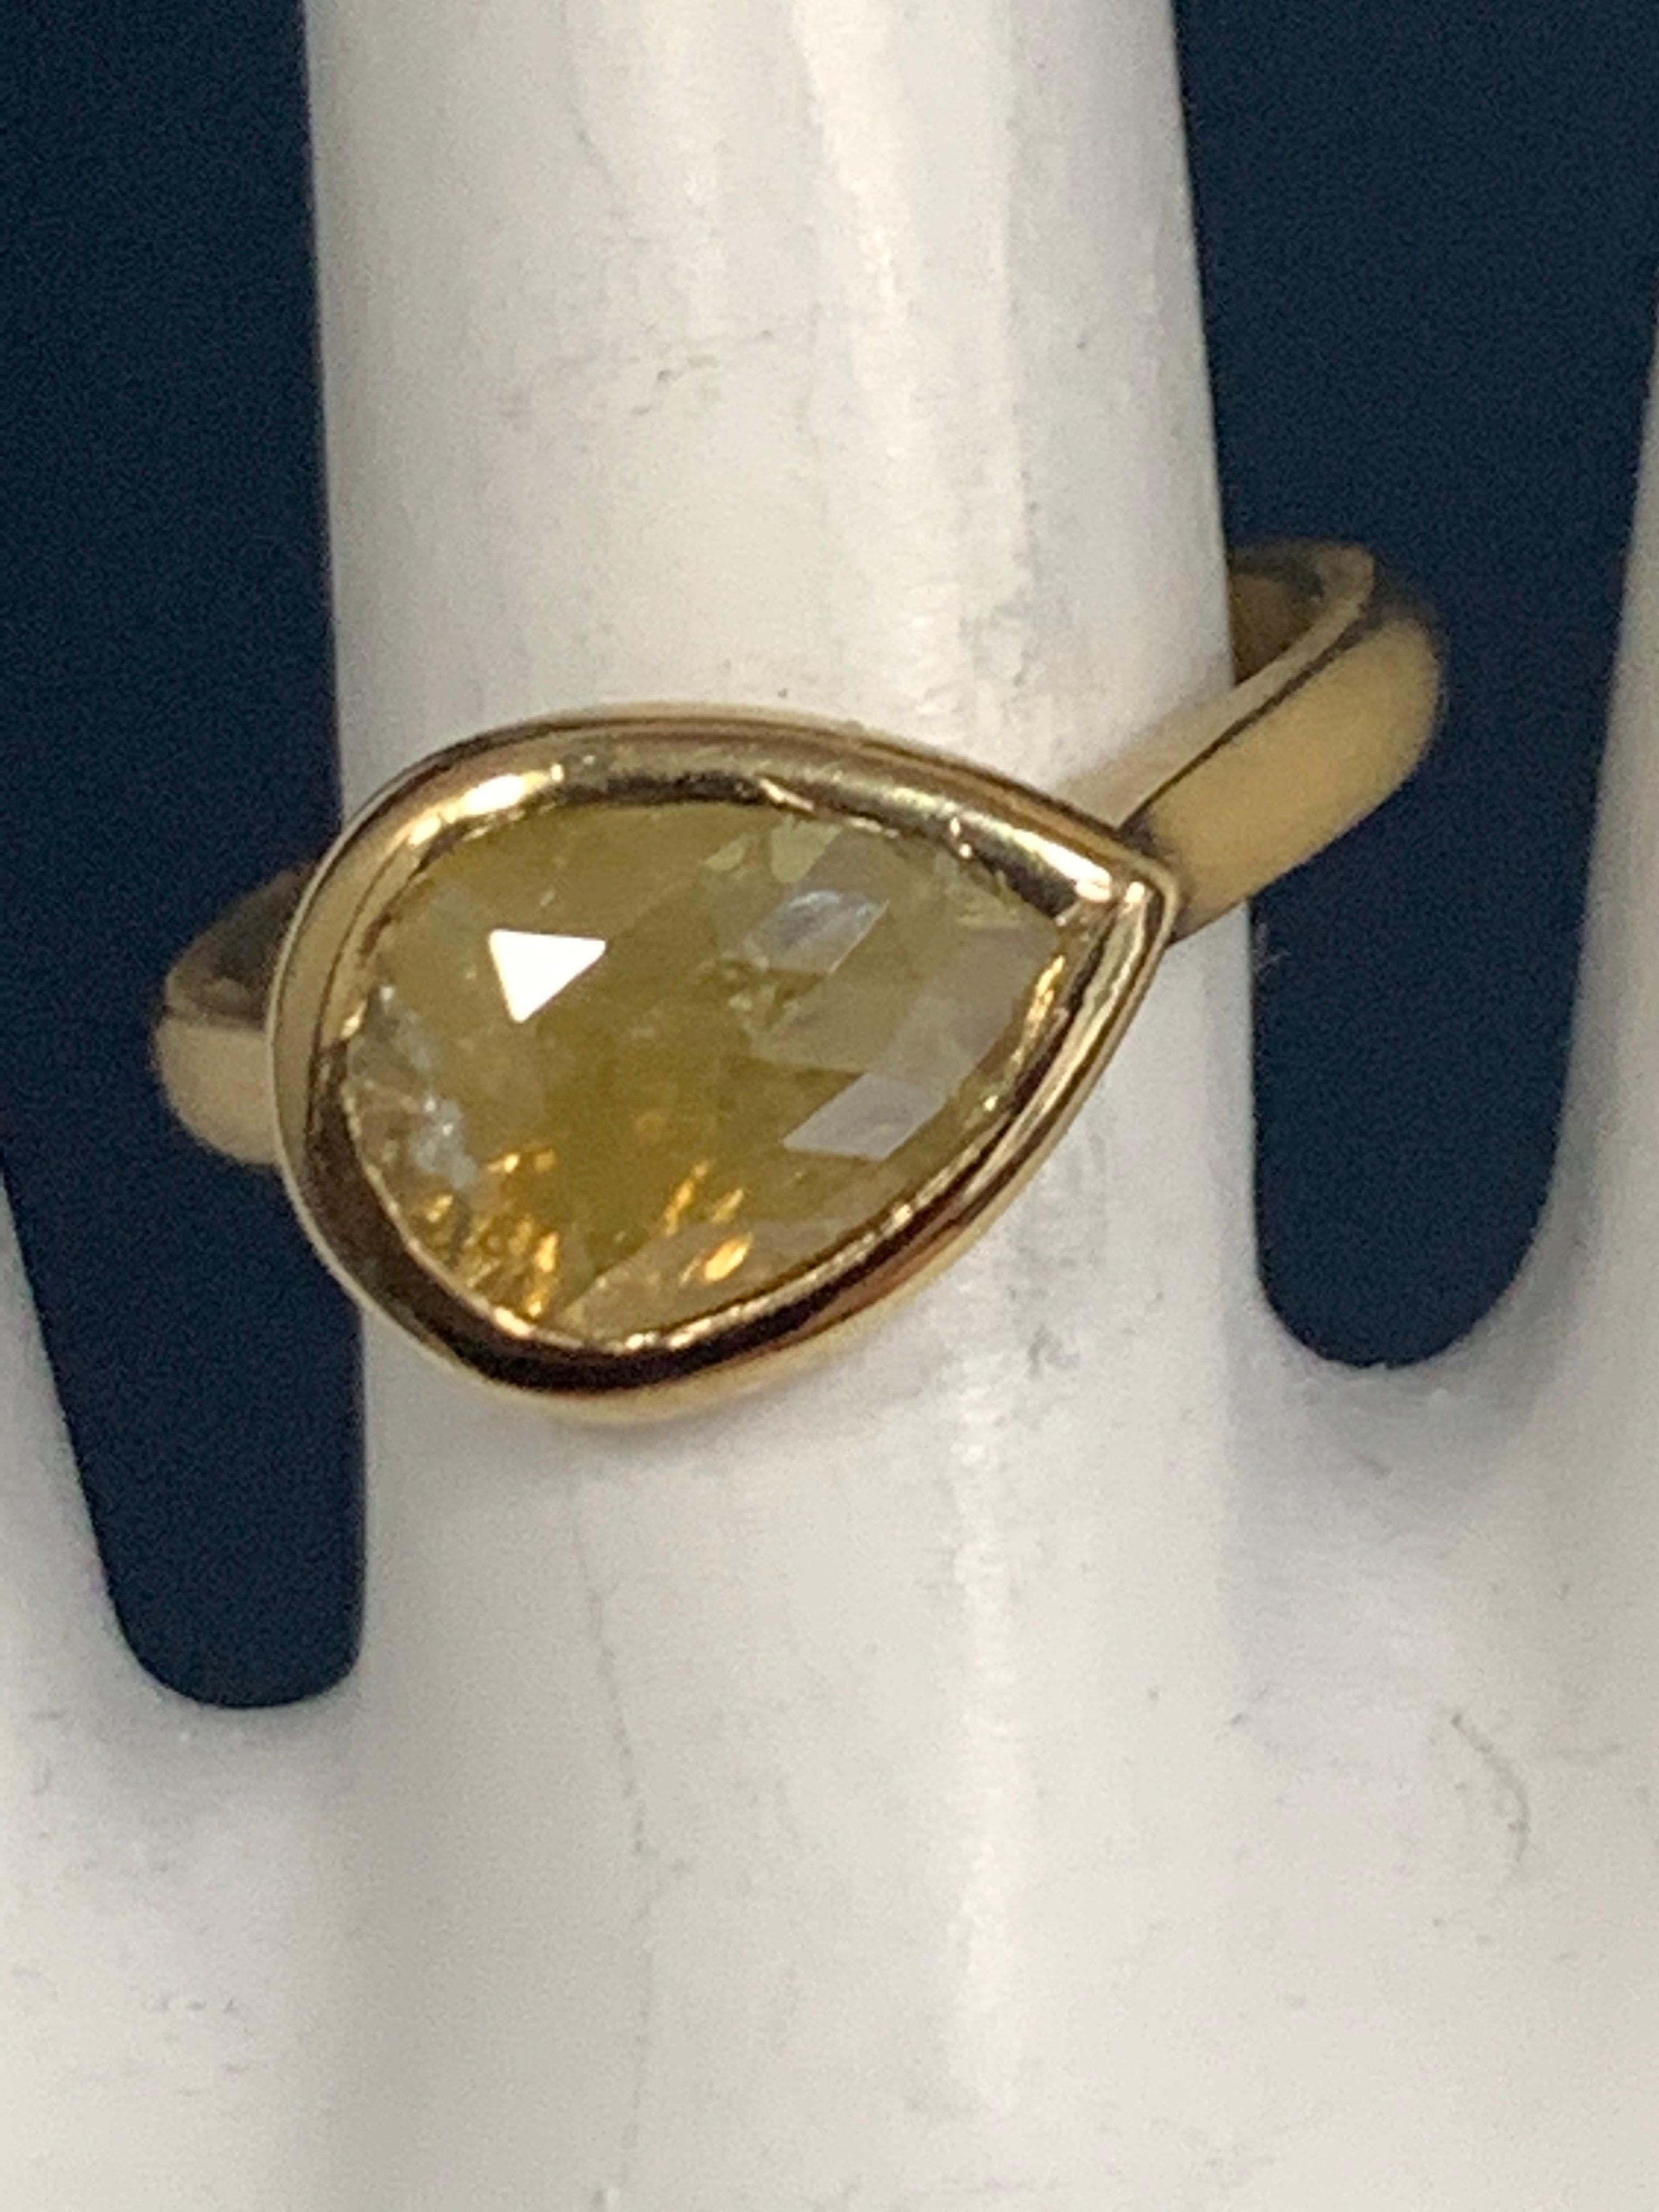 A stunning 18k yellow gold cocktail ring (matte finish) set with a 1.27 carat pear shaped rose cut natural brownish Yellow diamond measuring approximately 12x8mm. 

The weight of the ring is 4.5 grams, ring size is 4.75. 